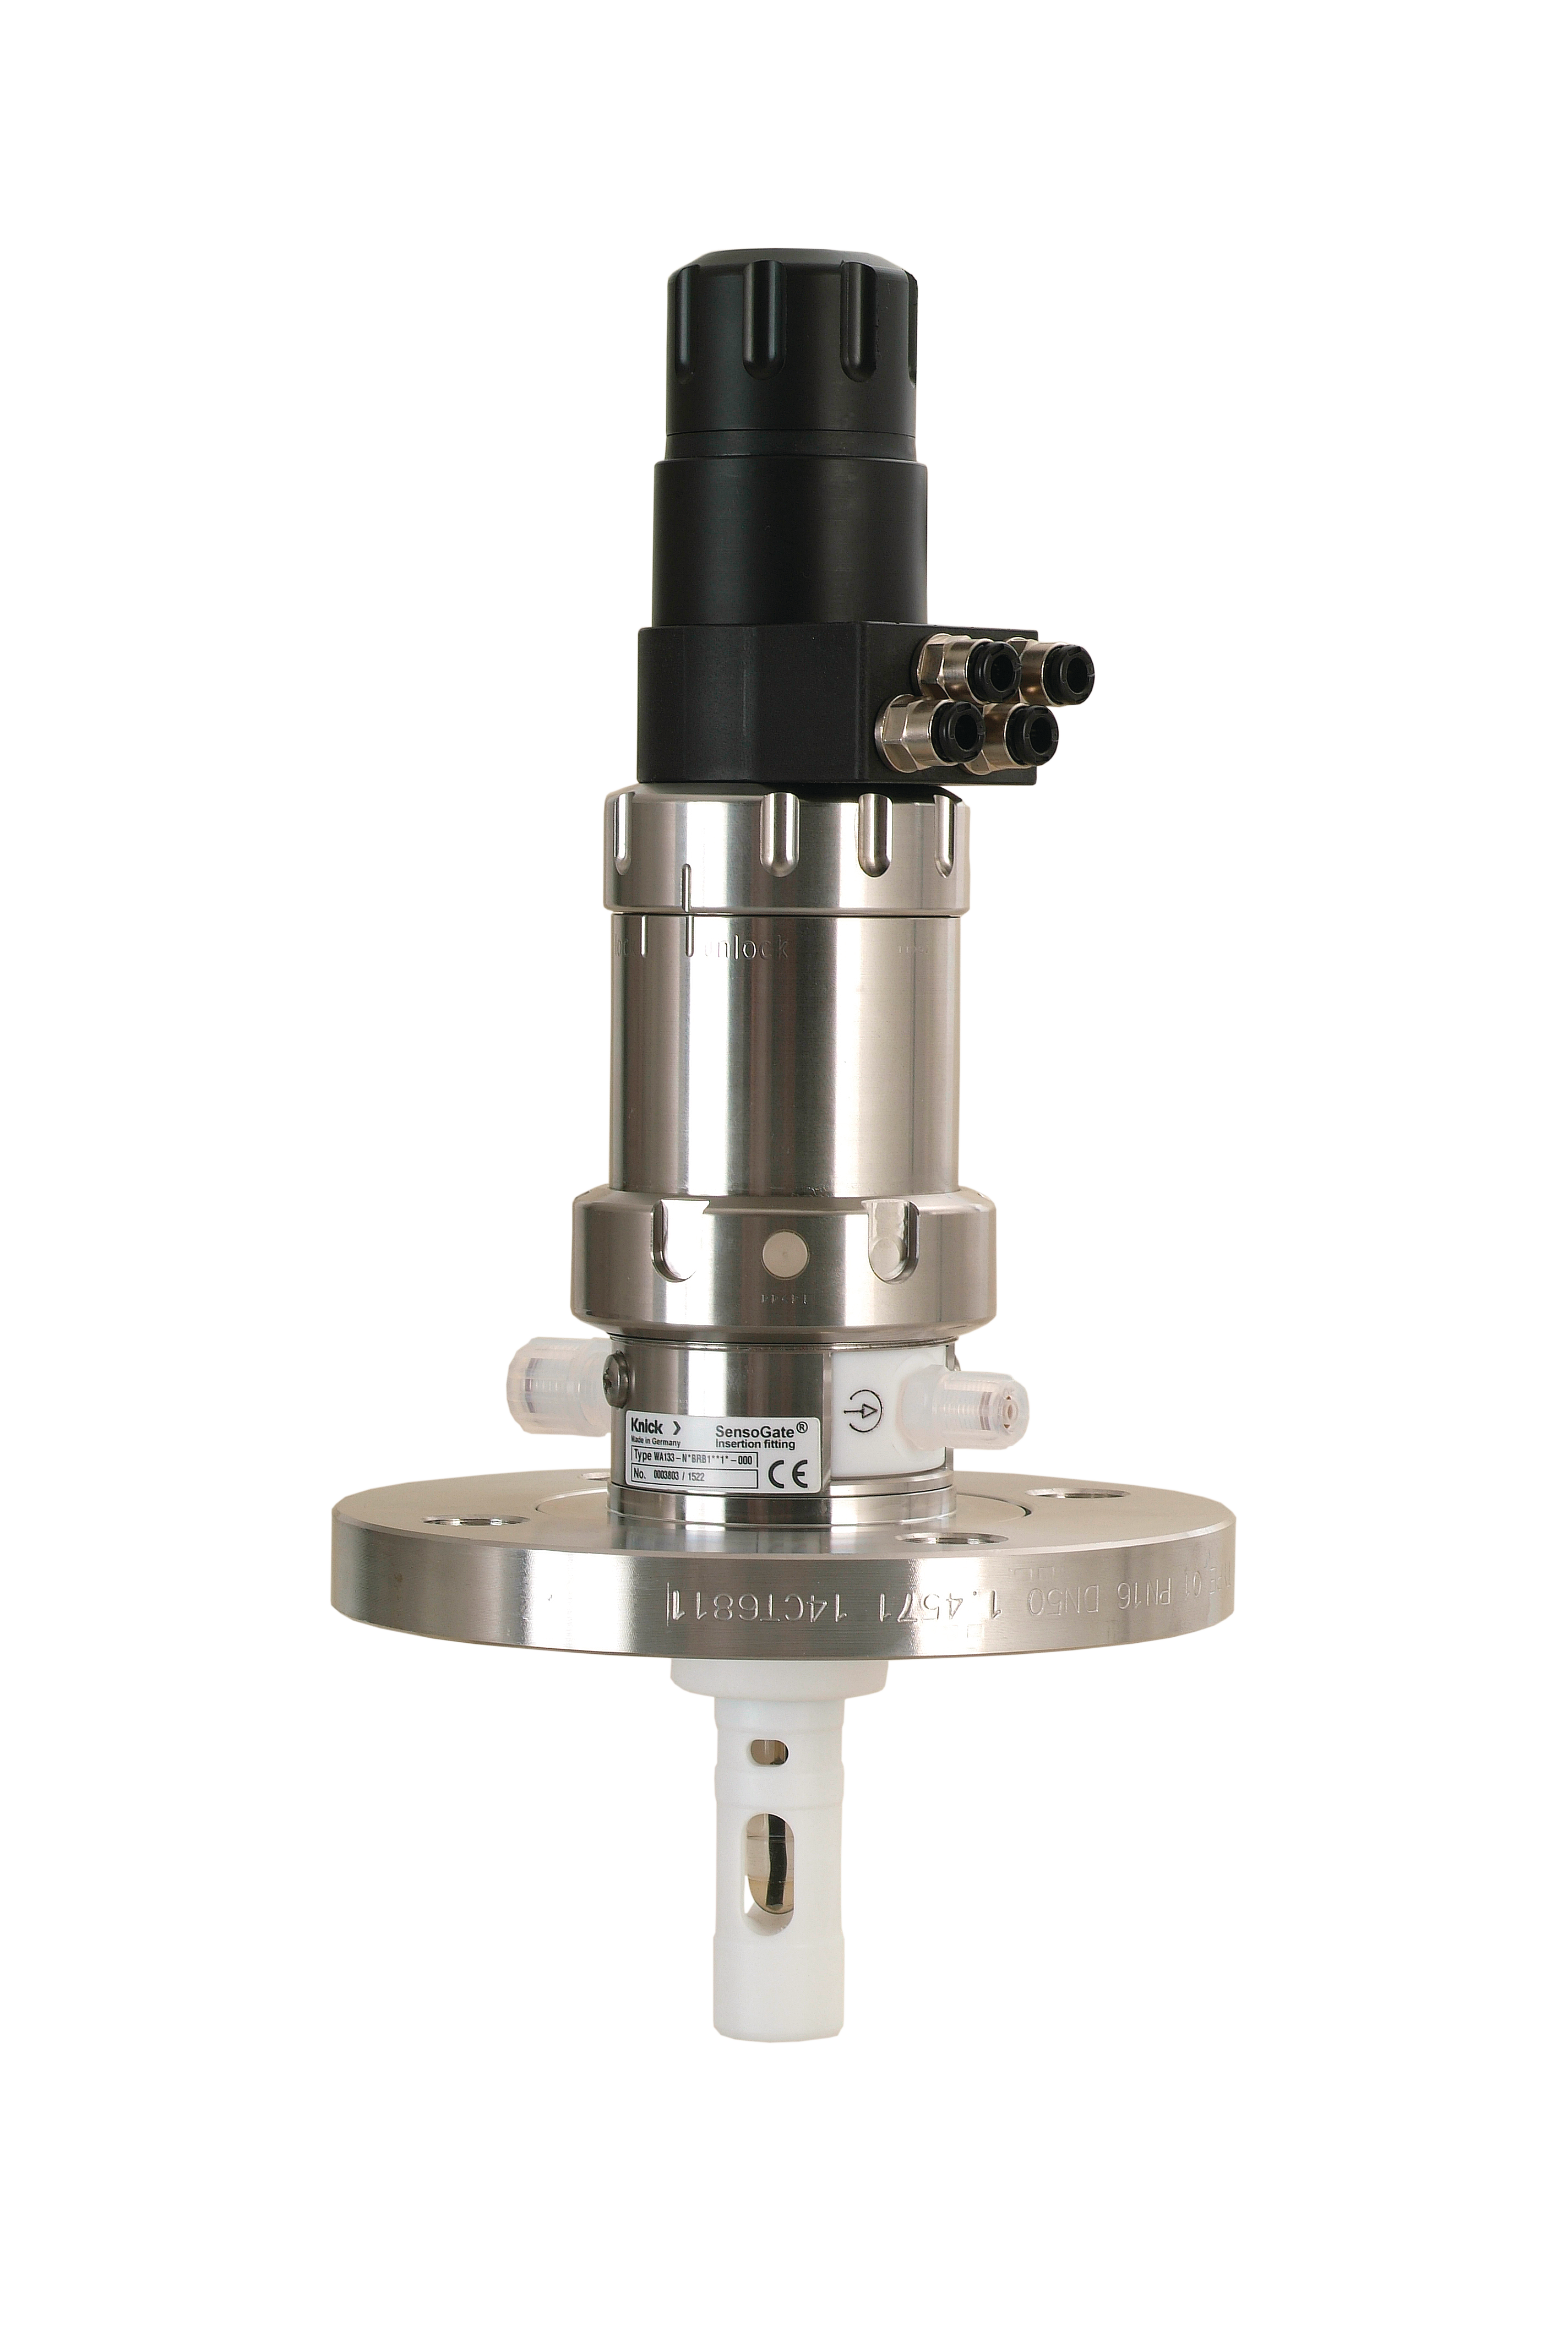 WA133 SensoGate Retractable Fitting | Modular | Pneumatic | Process-wetted parts made of PTFE | For simple, commercial controllers